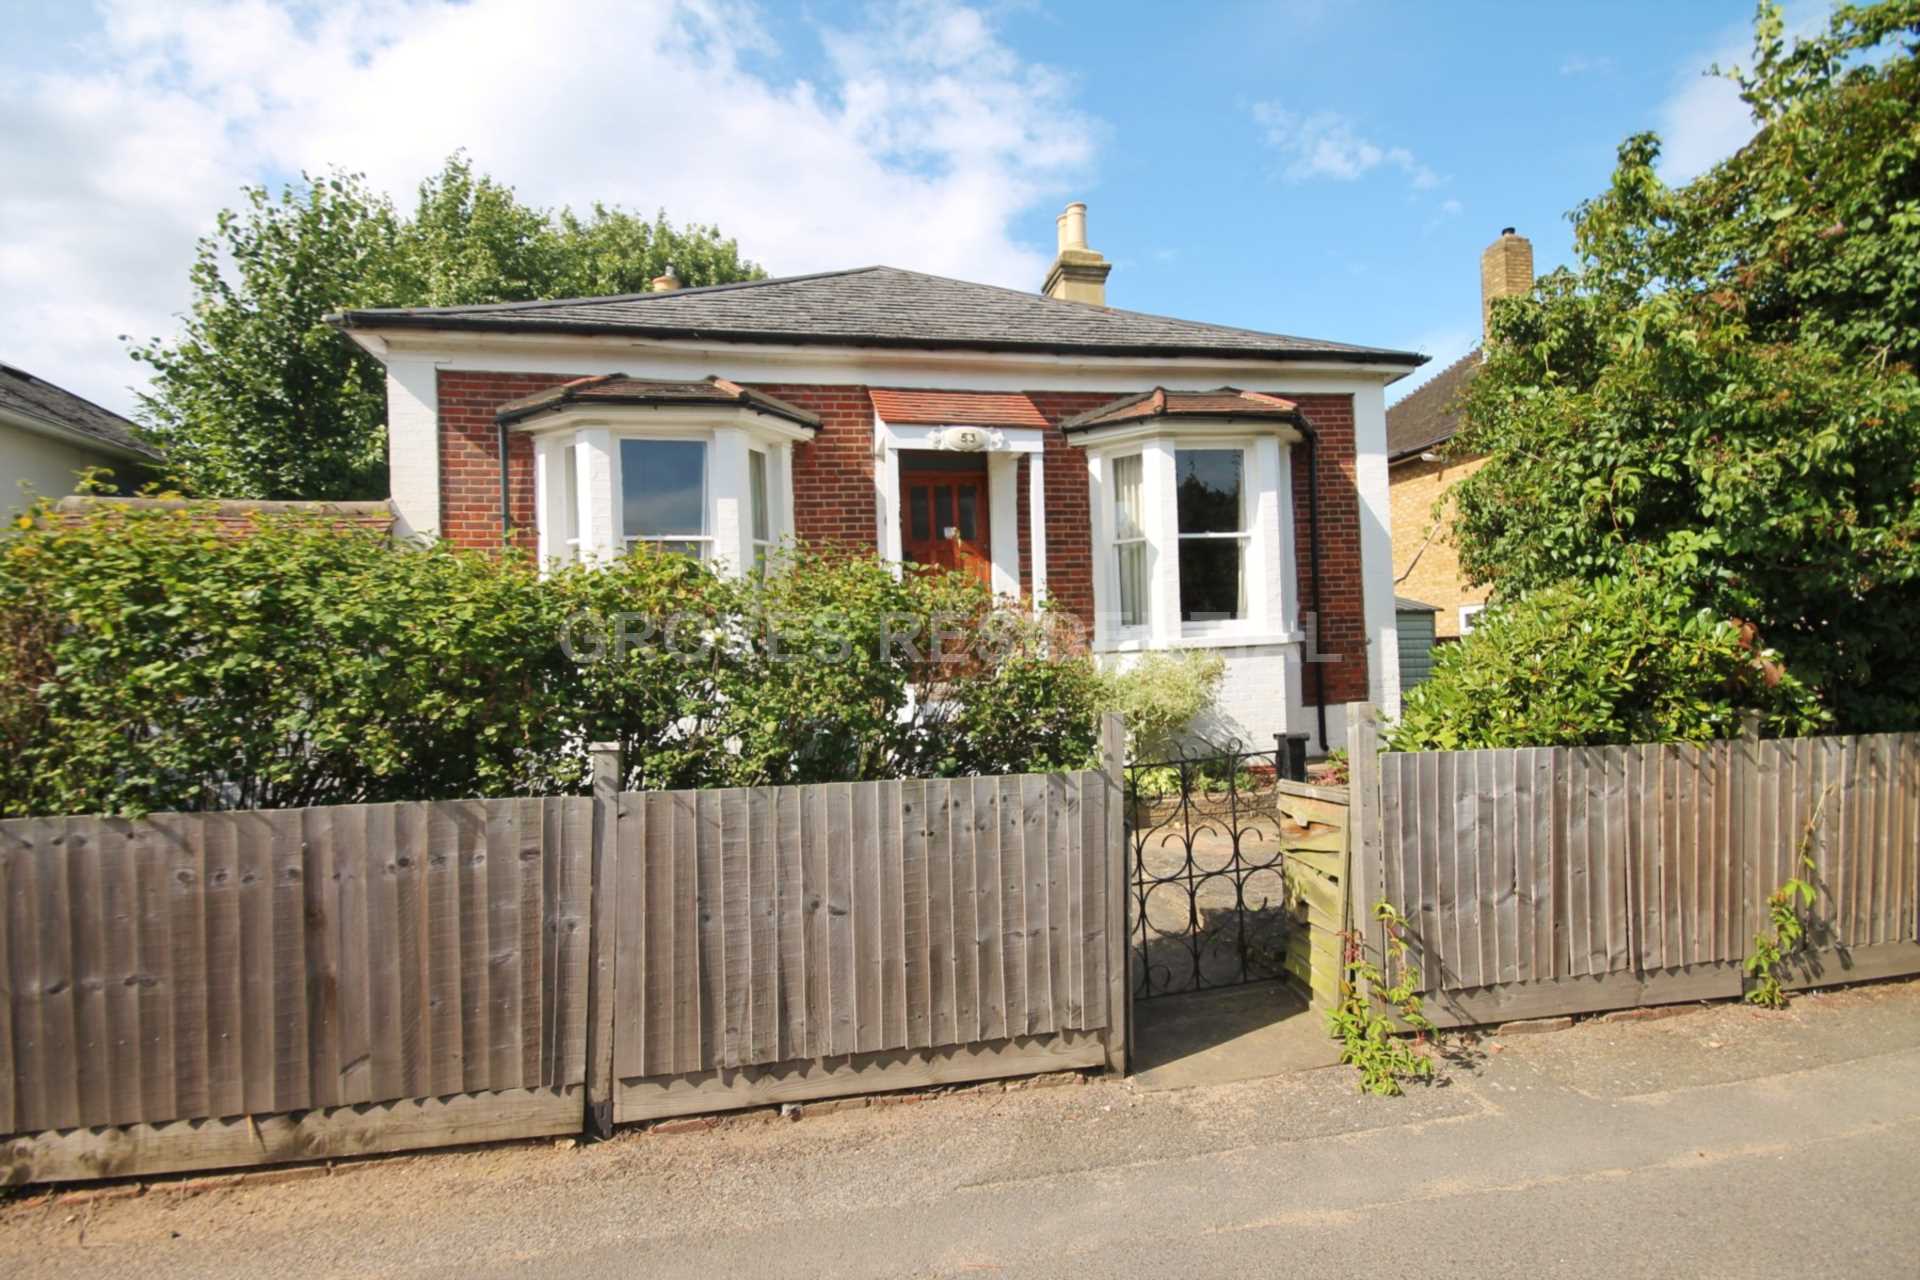 2 bed Detached House for rent in New Malden. From Groves Residential